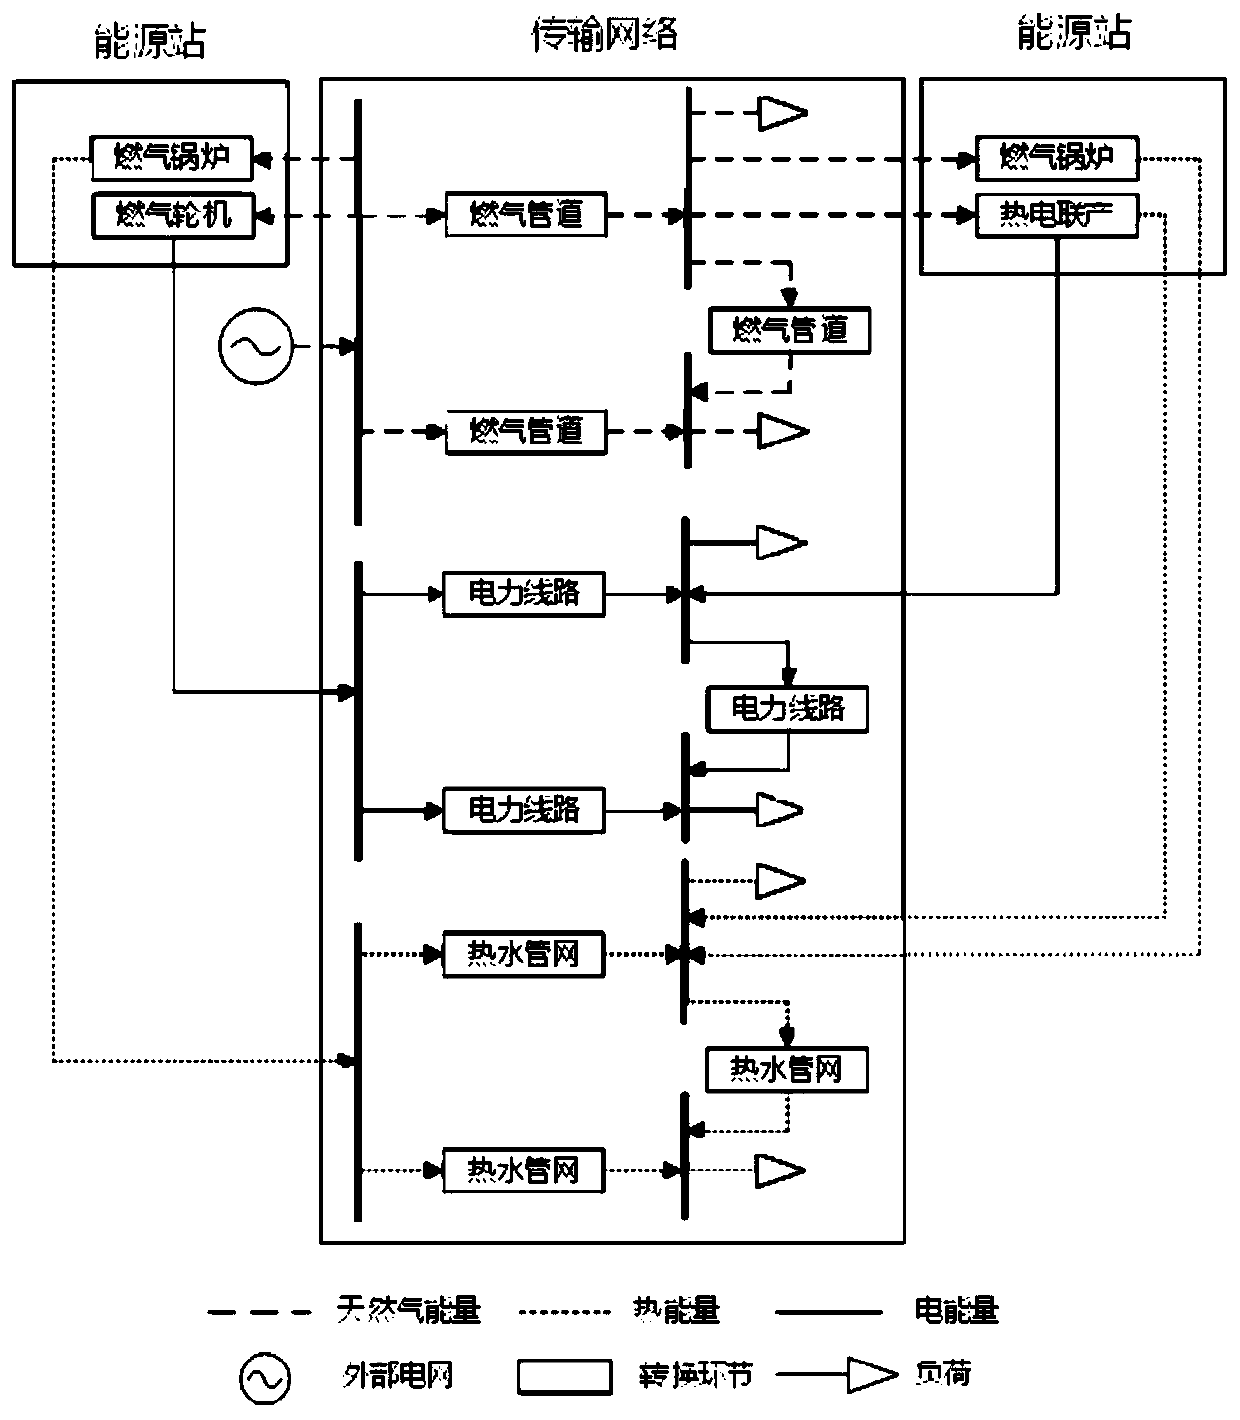 Multi-energy flow simultaneous calculation method of comprehensive energy system based on universal energy bus